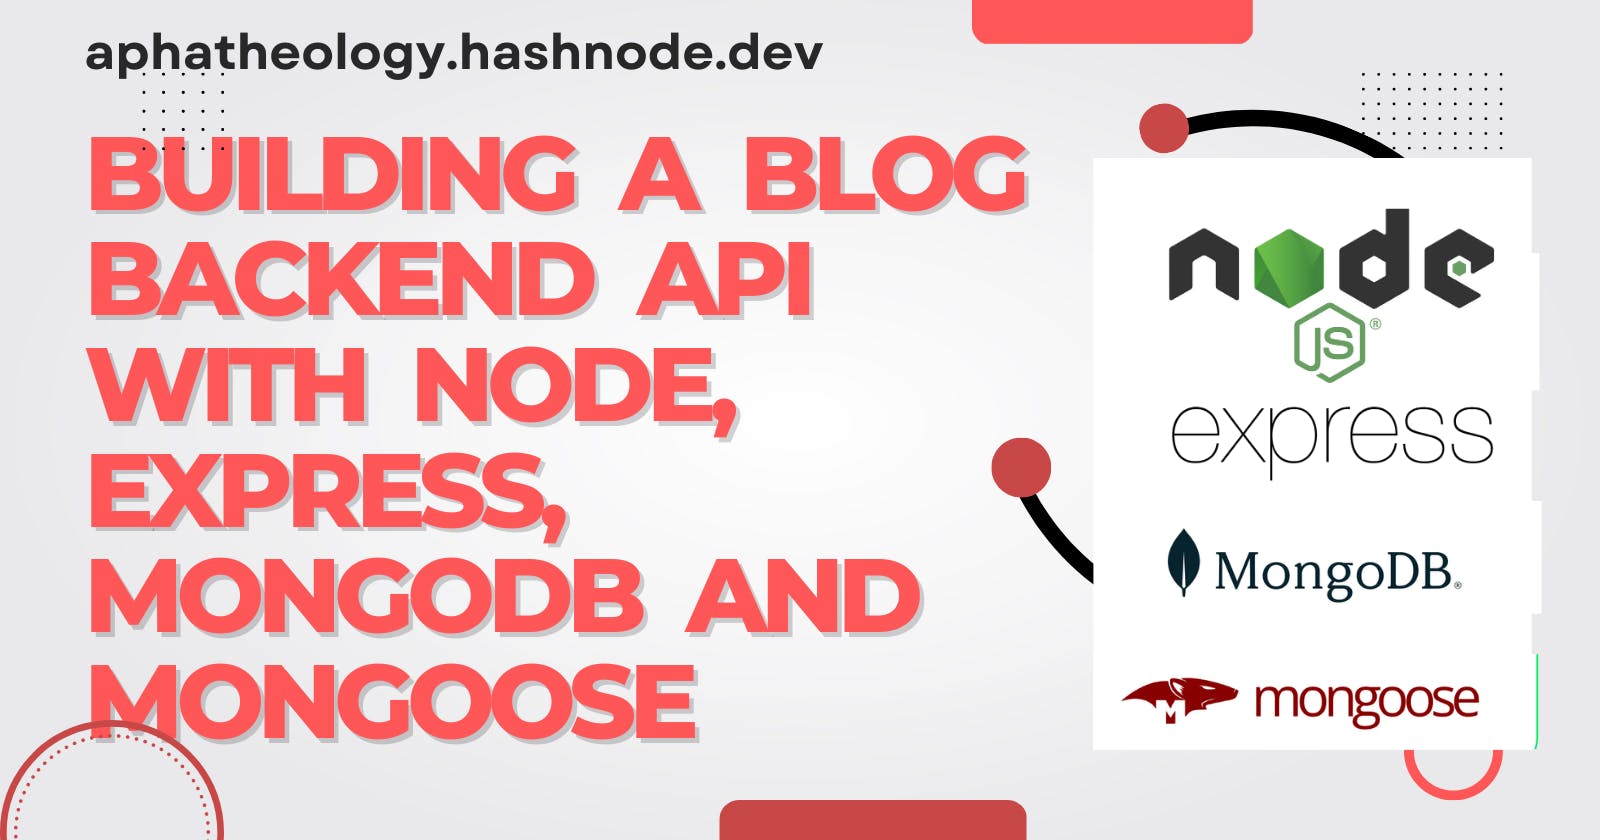 From Development to Deployment: Building and Deploying a Blog API with Node.js, Express, MongoDB, and Mongoose